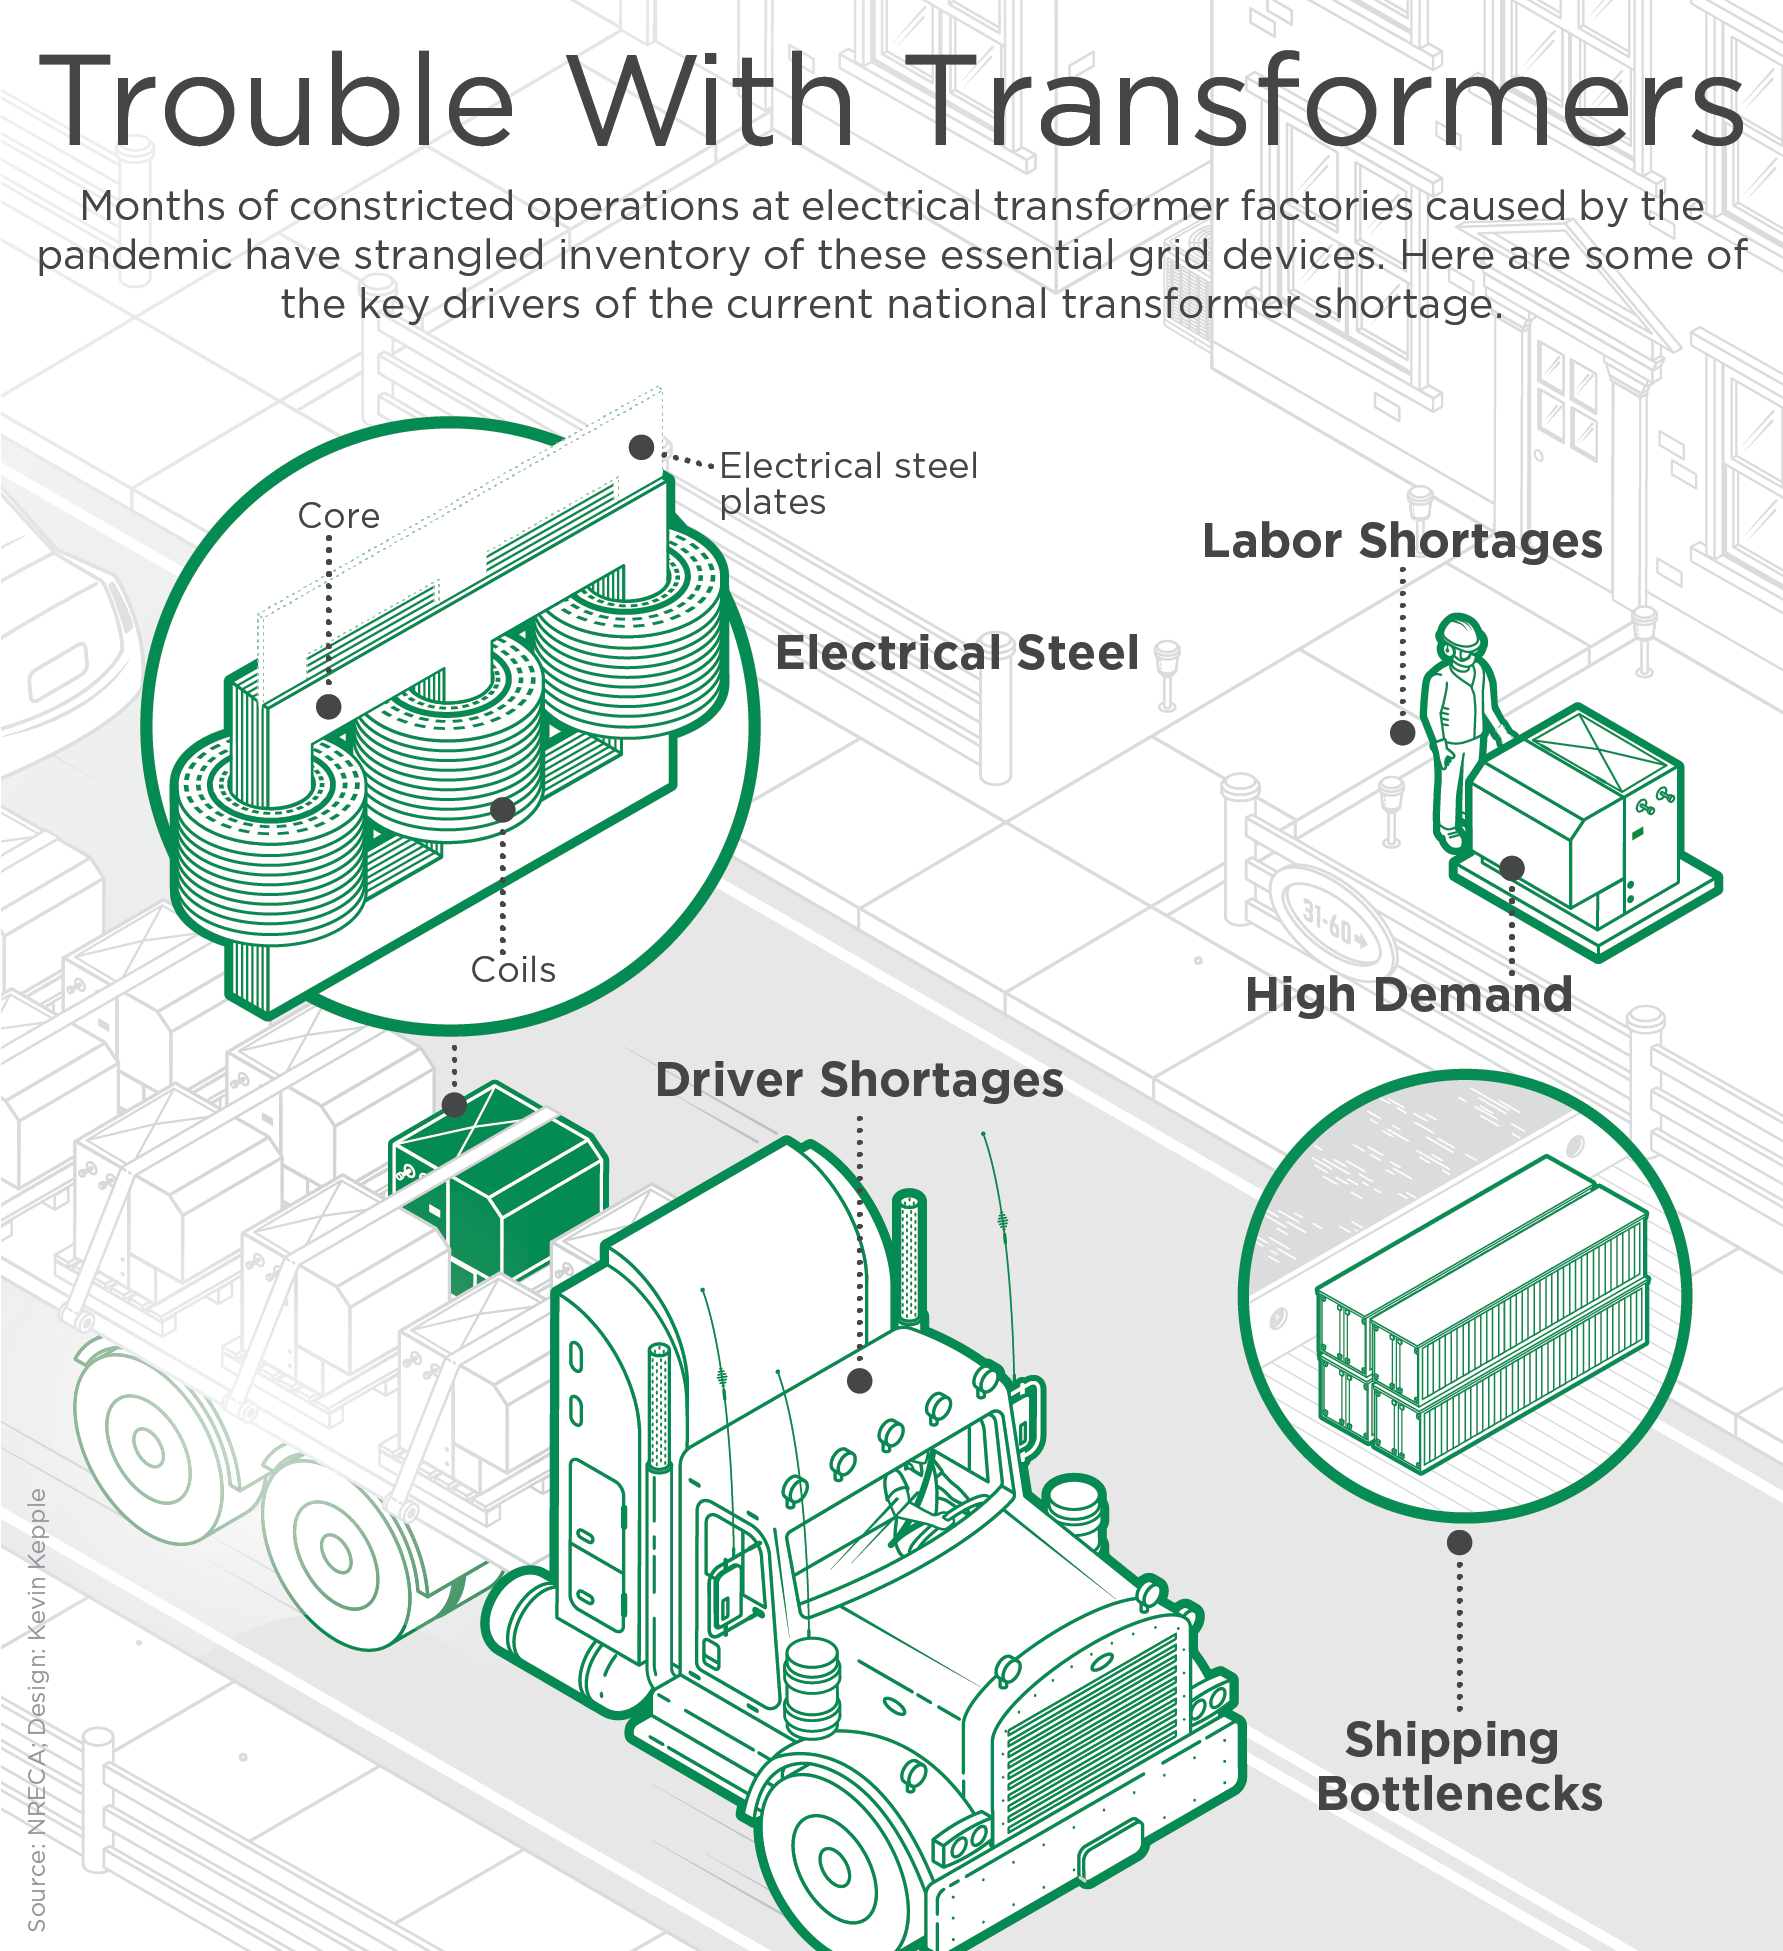 Graphic showing various elements of the supply chain for utility equipment (electrical steel, driver shortages, shipping bottlenecks, labor shortages, and high demand) highlighted in green. Text reads "Trouble With Transformers. Months of constricted operations at electrical transformer factories caused by the pandemic have strangled inventory of these essential grid devices. Here are some of the key drivers of the current national transformer shortage."